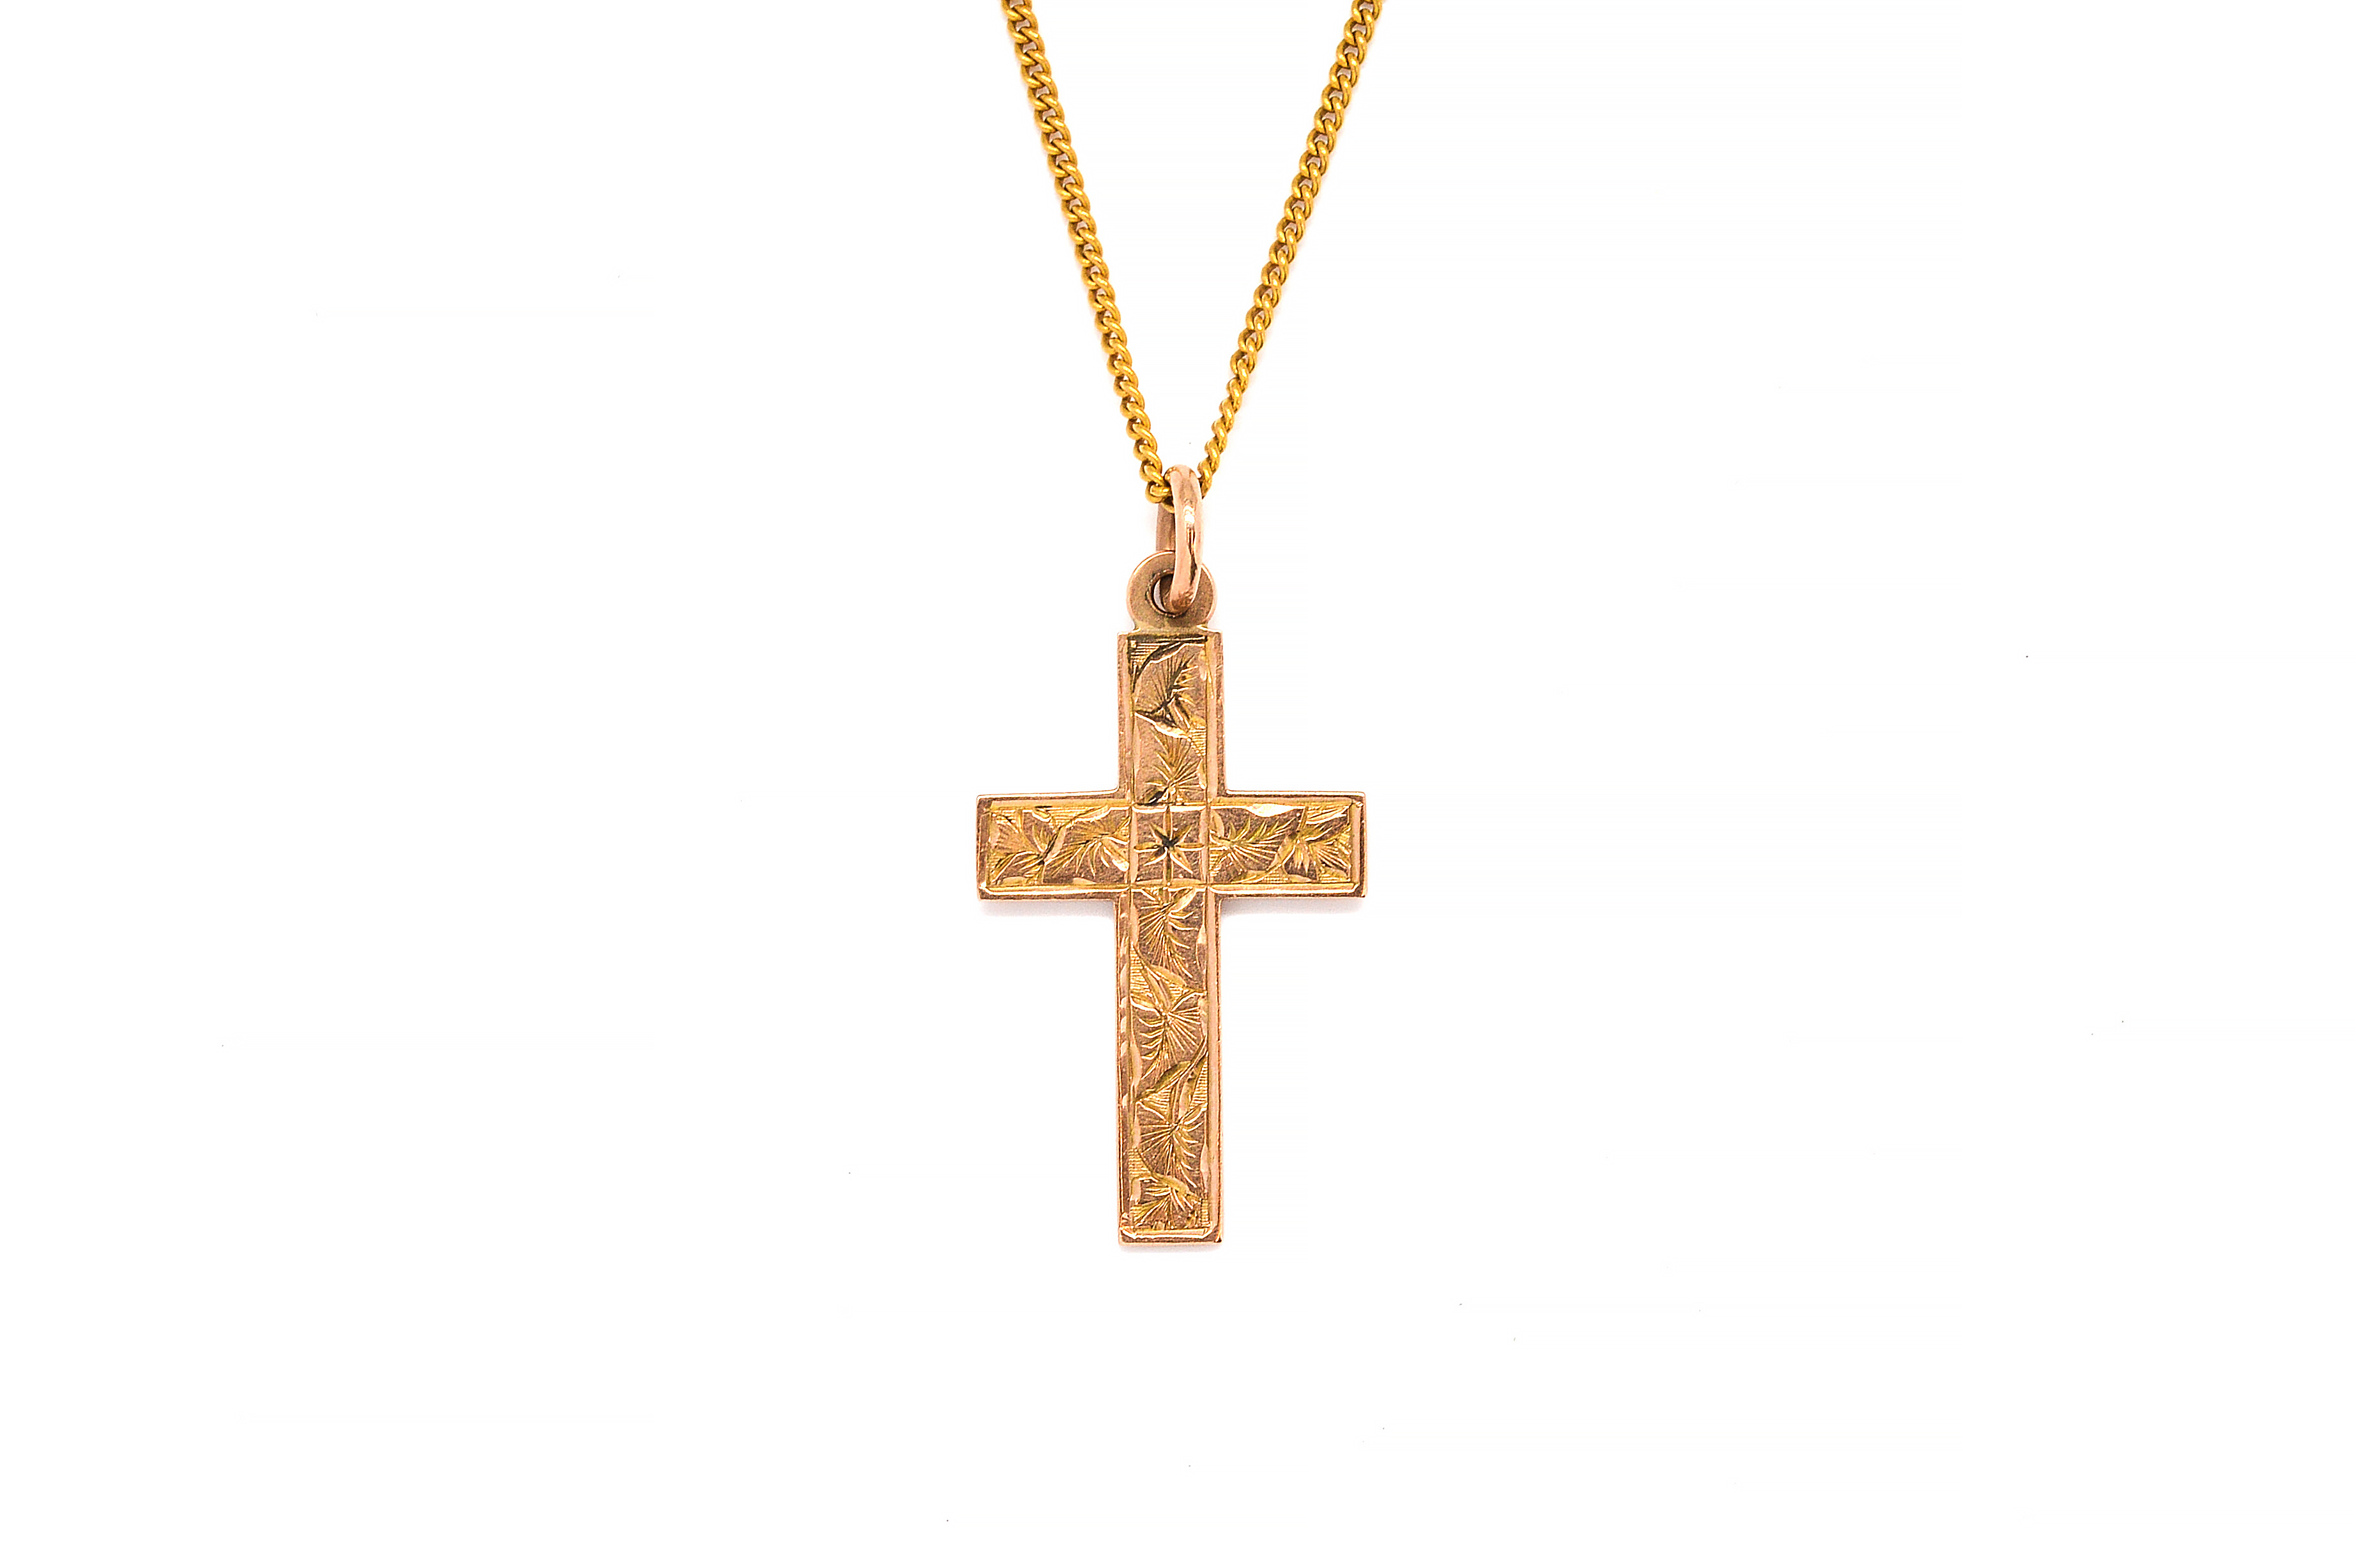 A 9CT GOLD PENDANT CROSS WITH A 3ae654